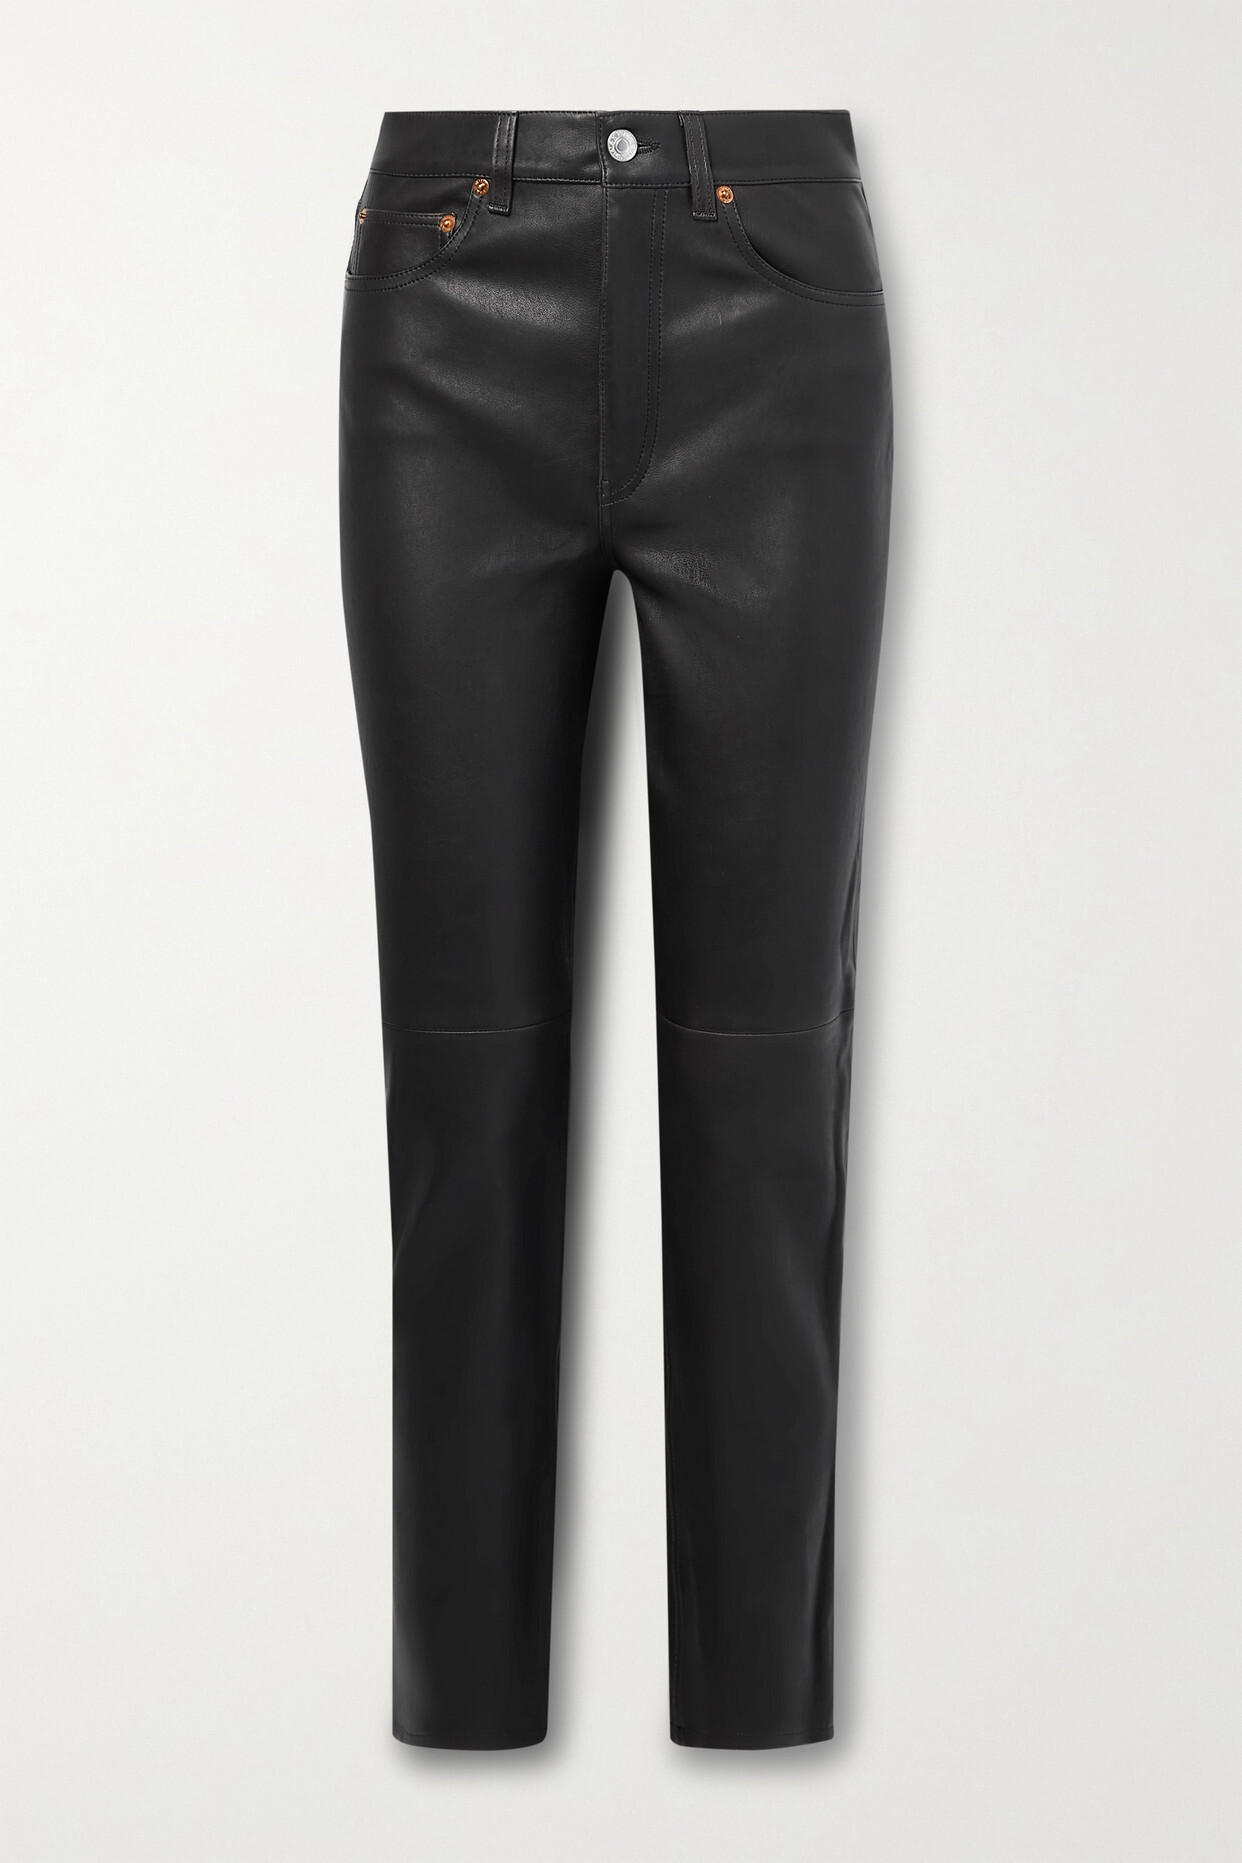 RE/DONE - 70s Leather Straight-leg Pants - Black